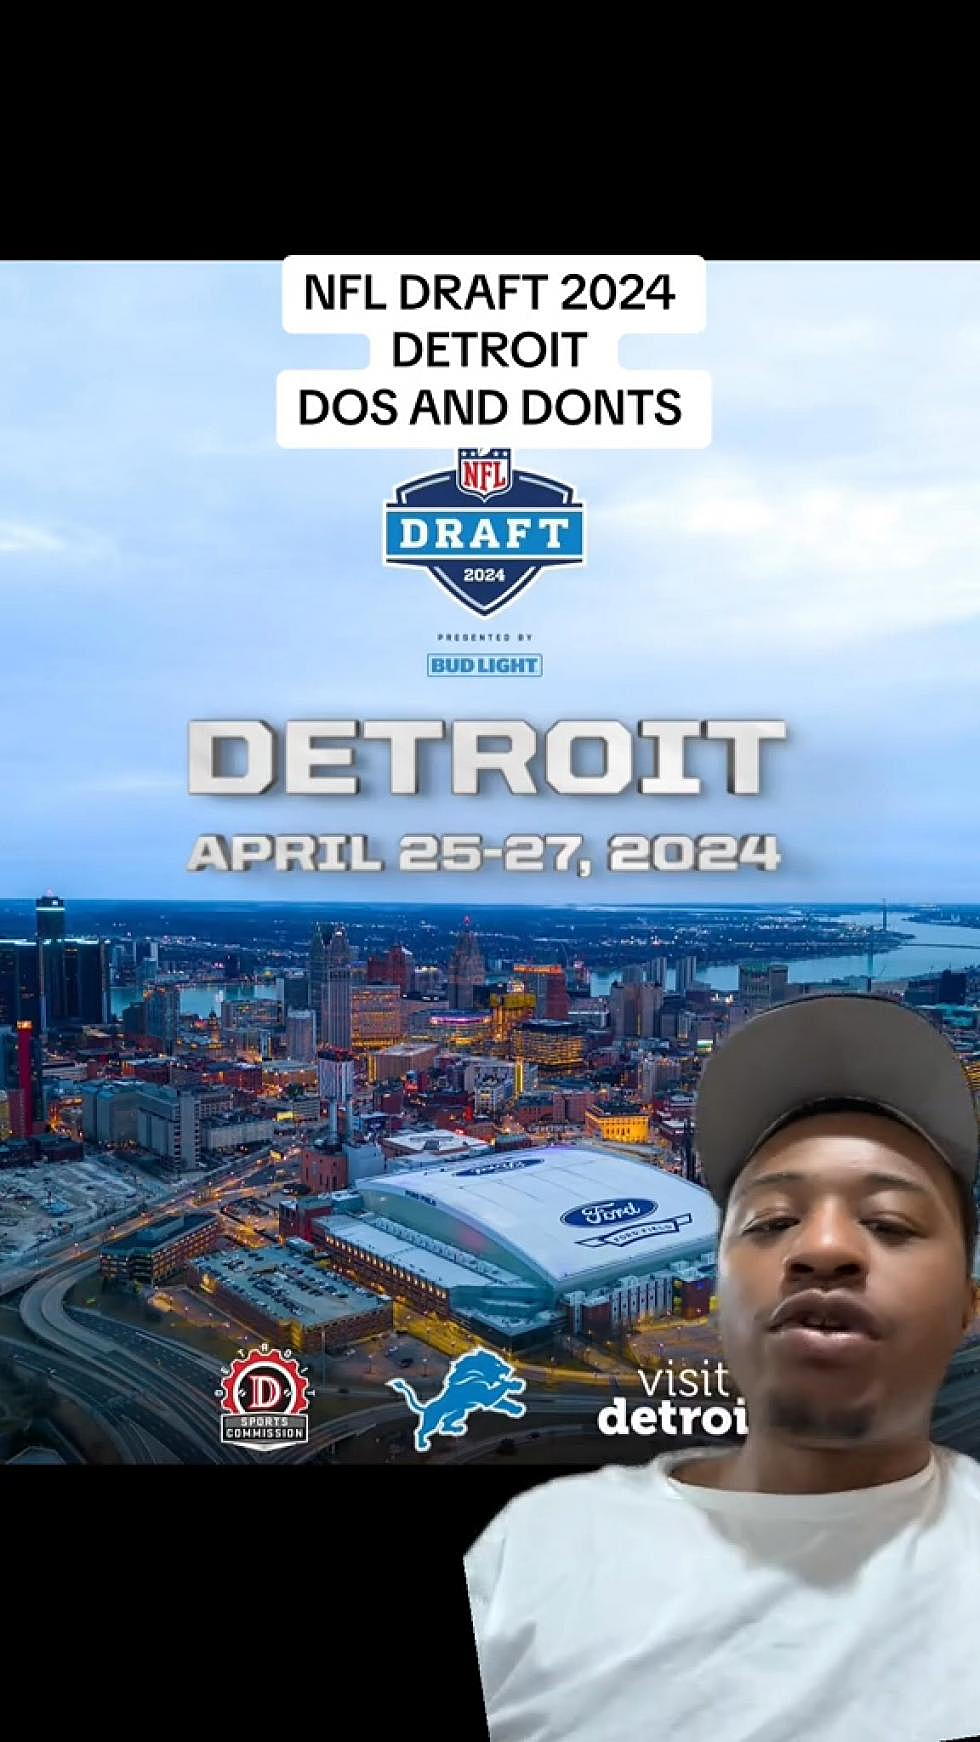 The 2024 NFL Draft Guide For Detroit Dos And Donts